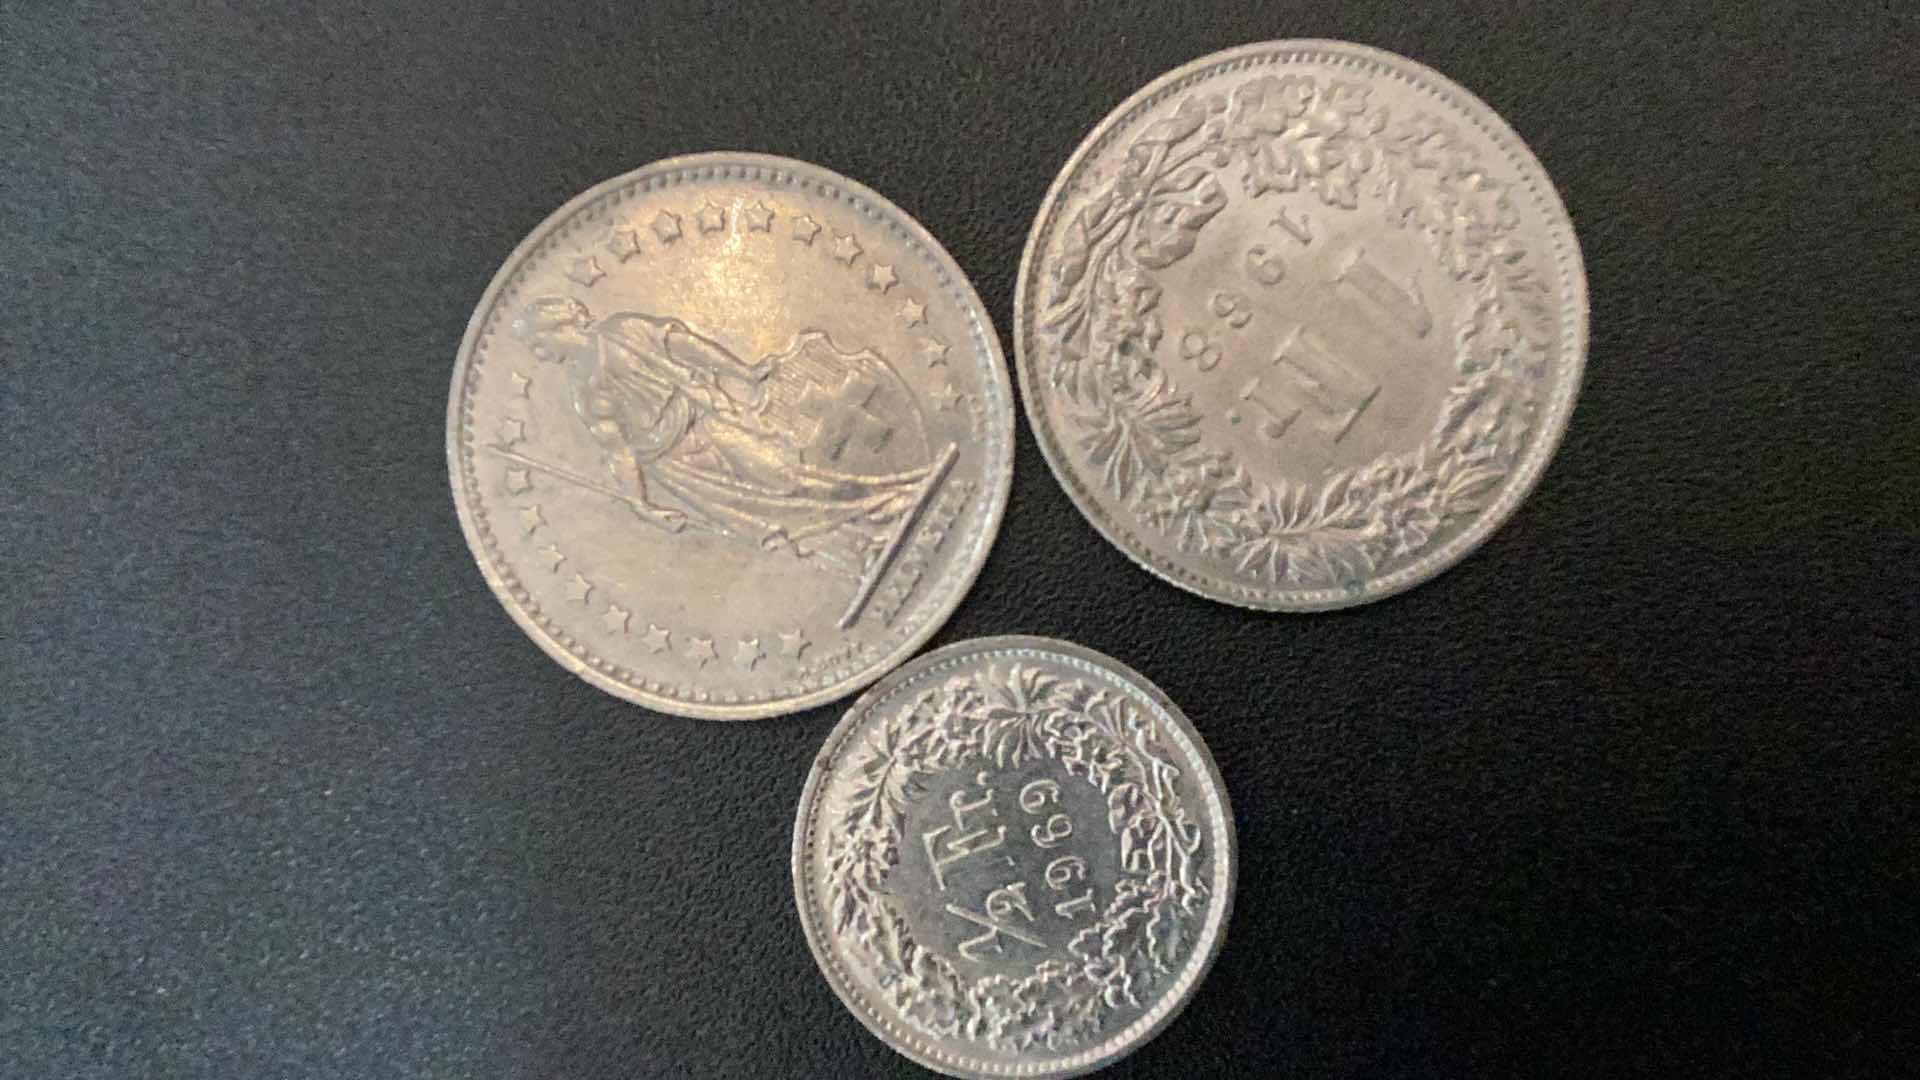 Photo 1 of 3 COLLECTIBLE COINS - SWITZERLAND 1968, 1968, 1969